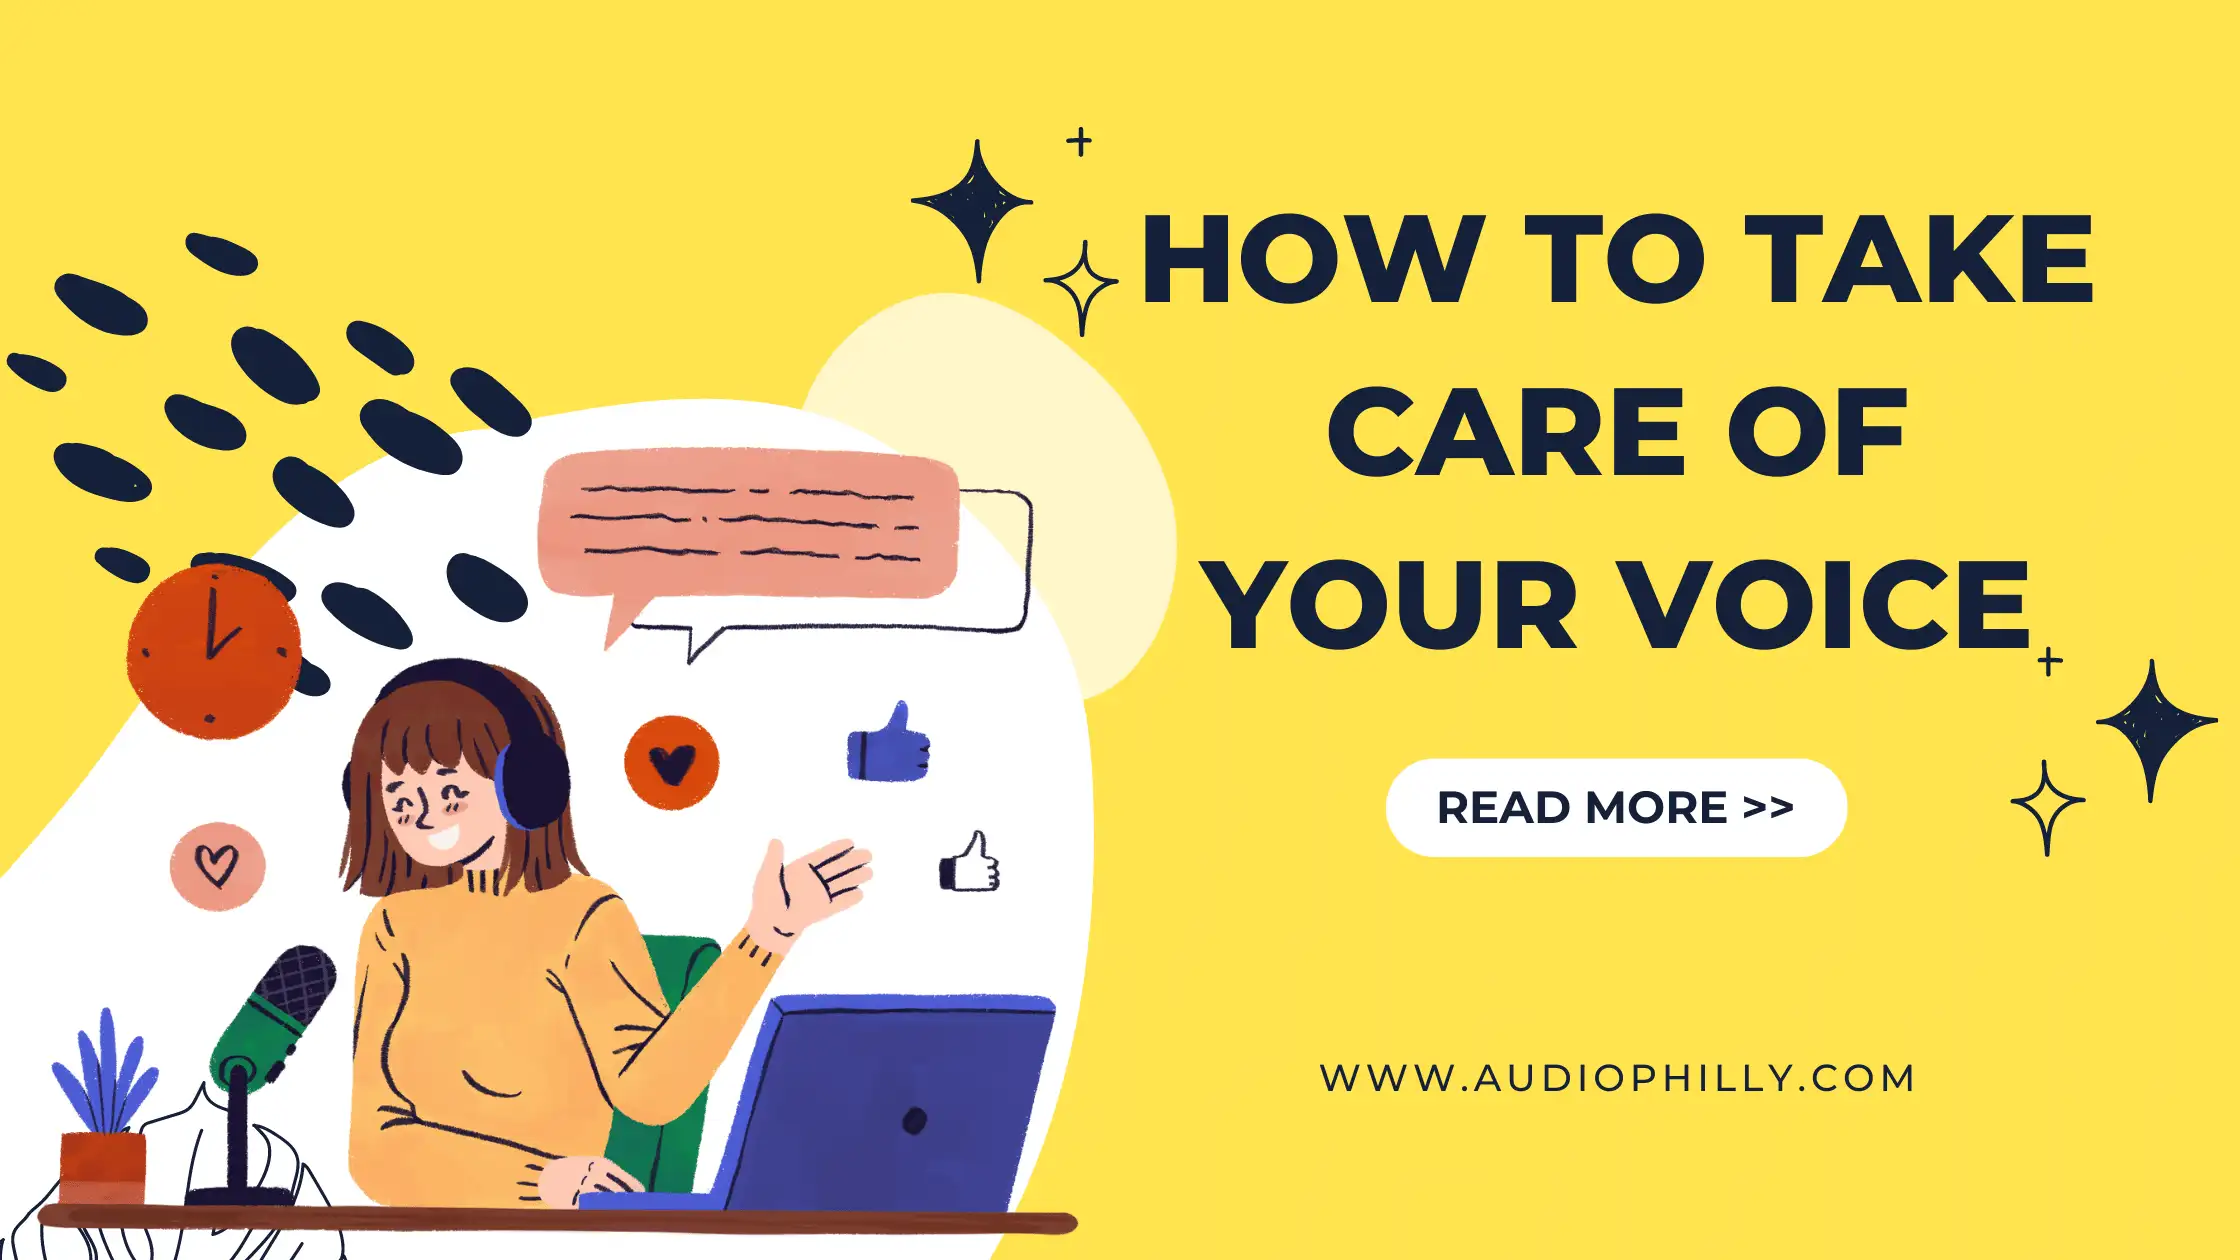 how to take care of your voice as a voice actor